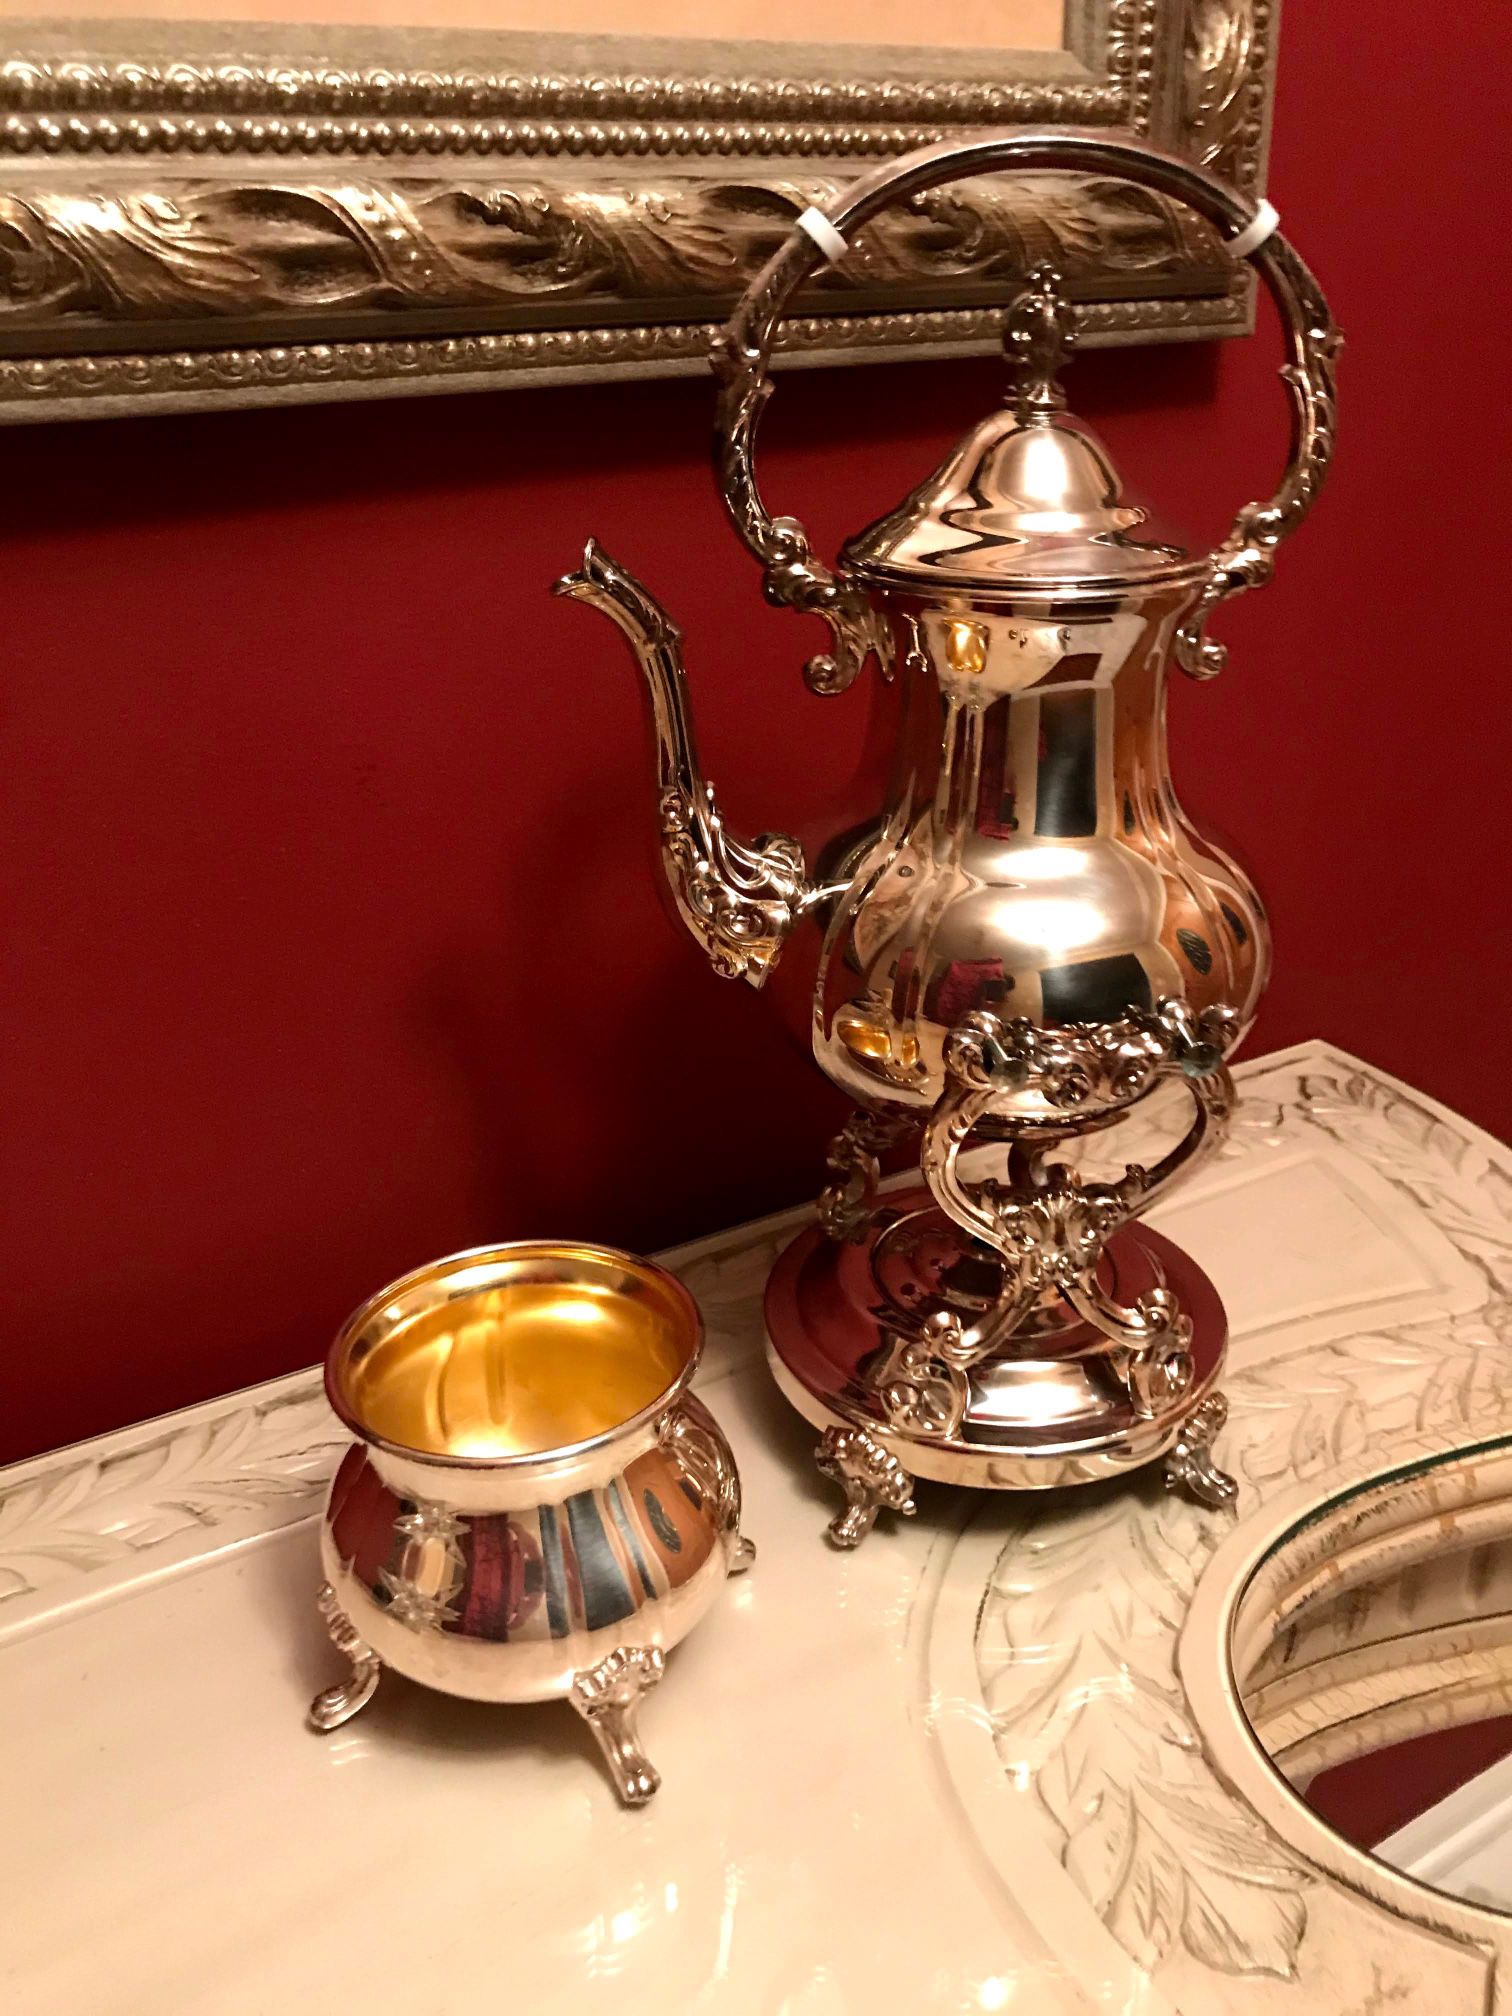 Towle Silverplated Tilting Teapot on stand with Sugar/Water Bowl New in box.  $85 